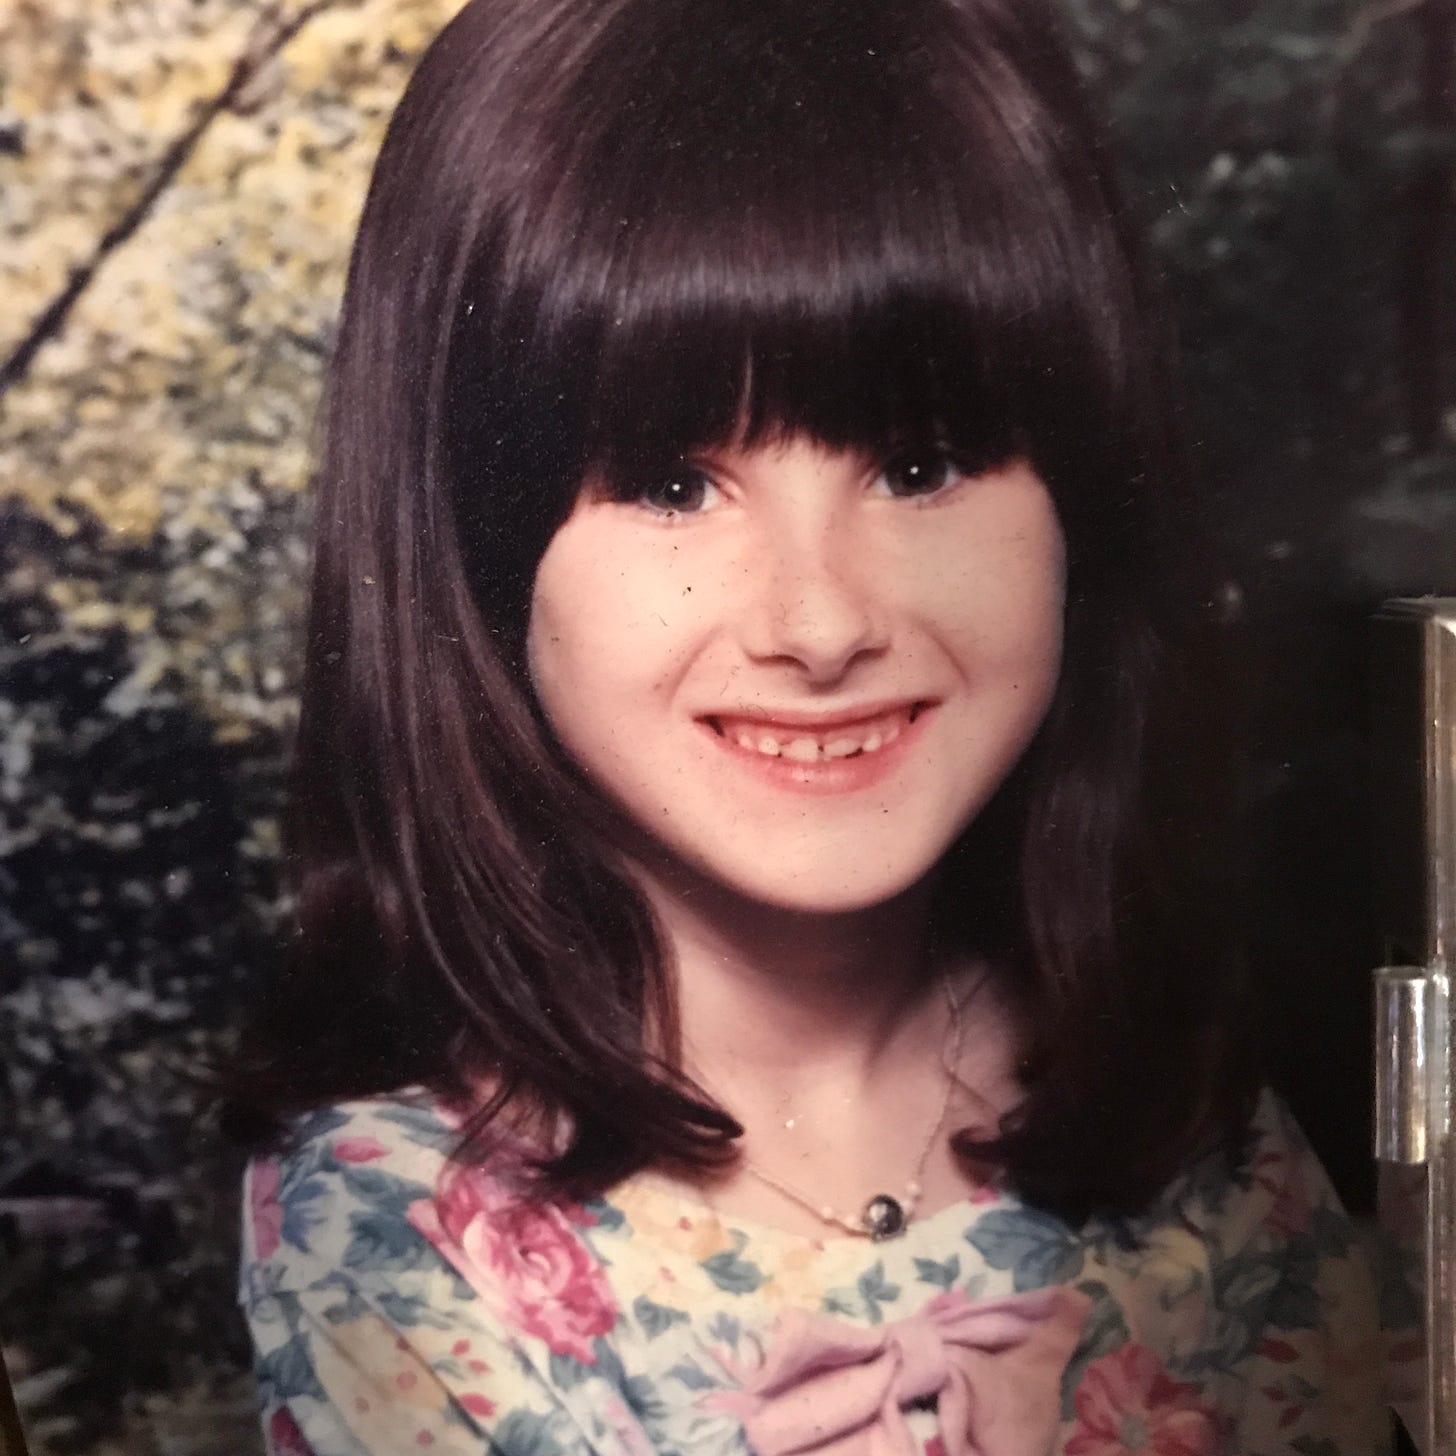 Young Lyric, smiling as required for a photo. They have black hair, a pale face, and newly growing in front teeth.